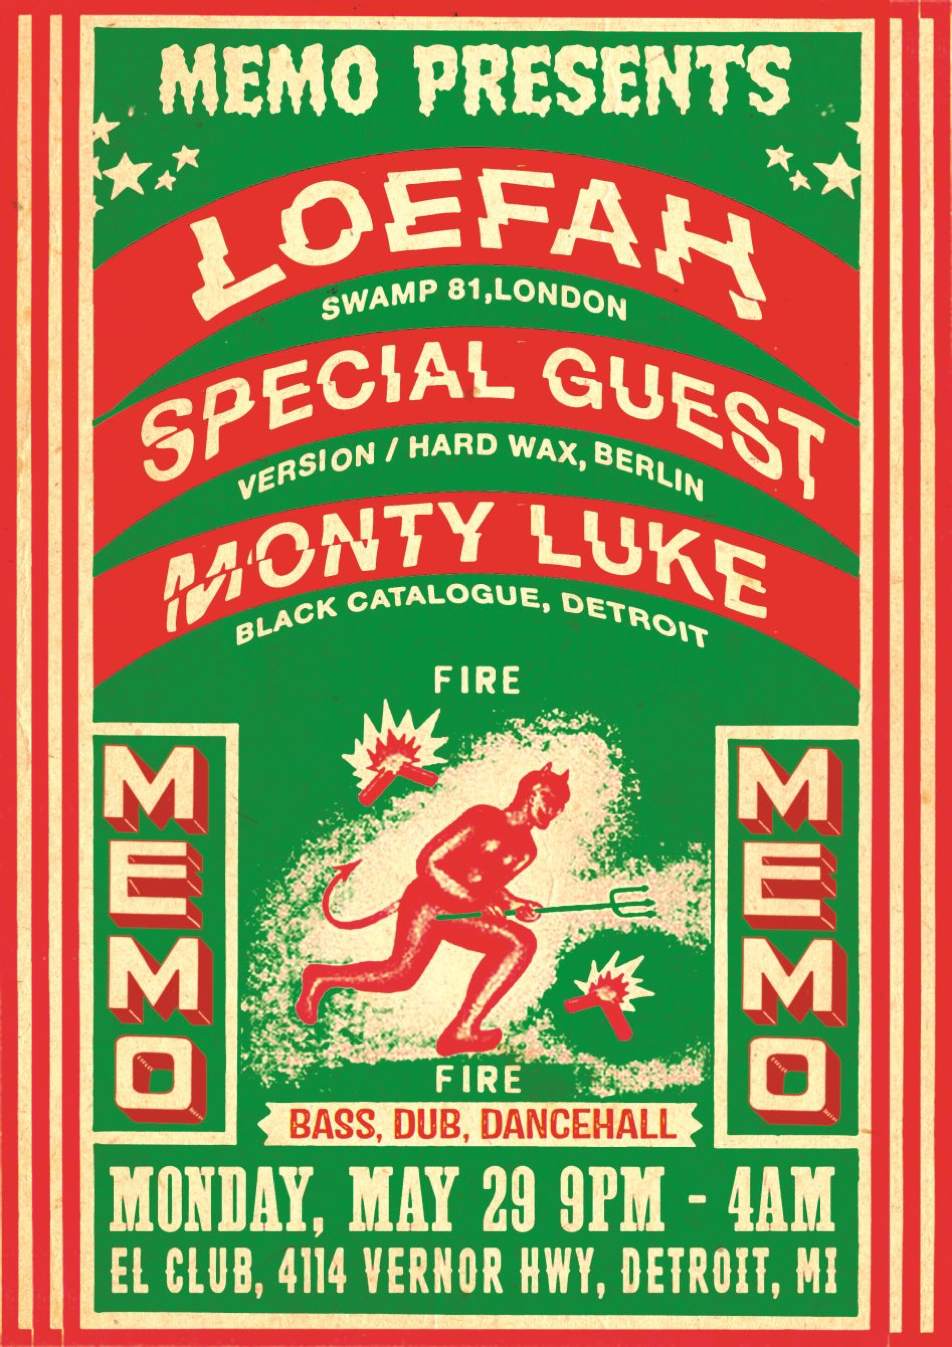 Memo brings Loefah to Detroit for a  Movement afterparty image